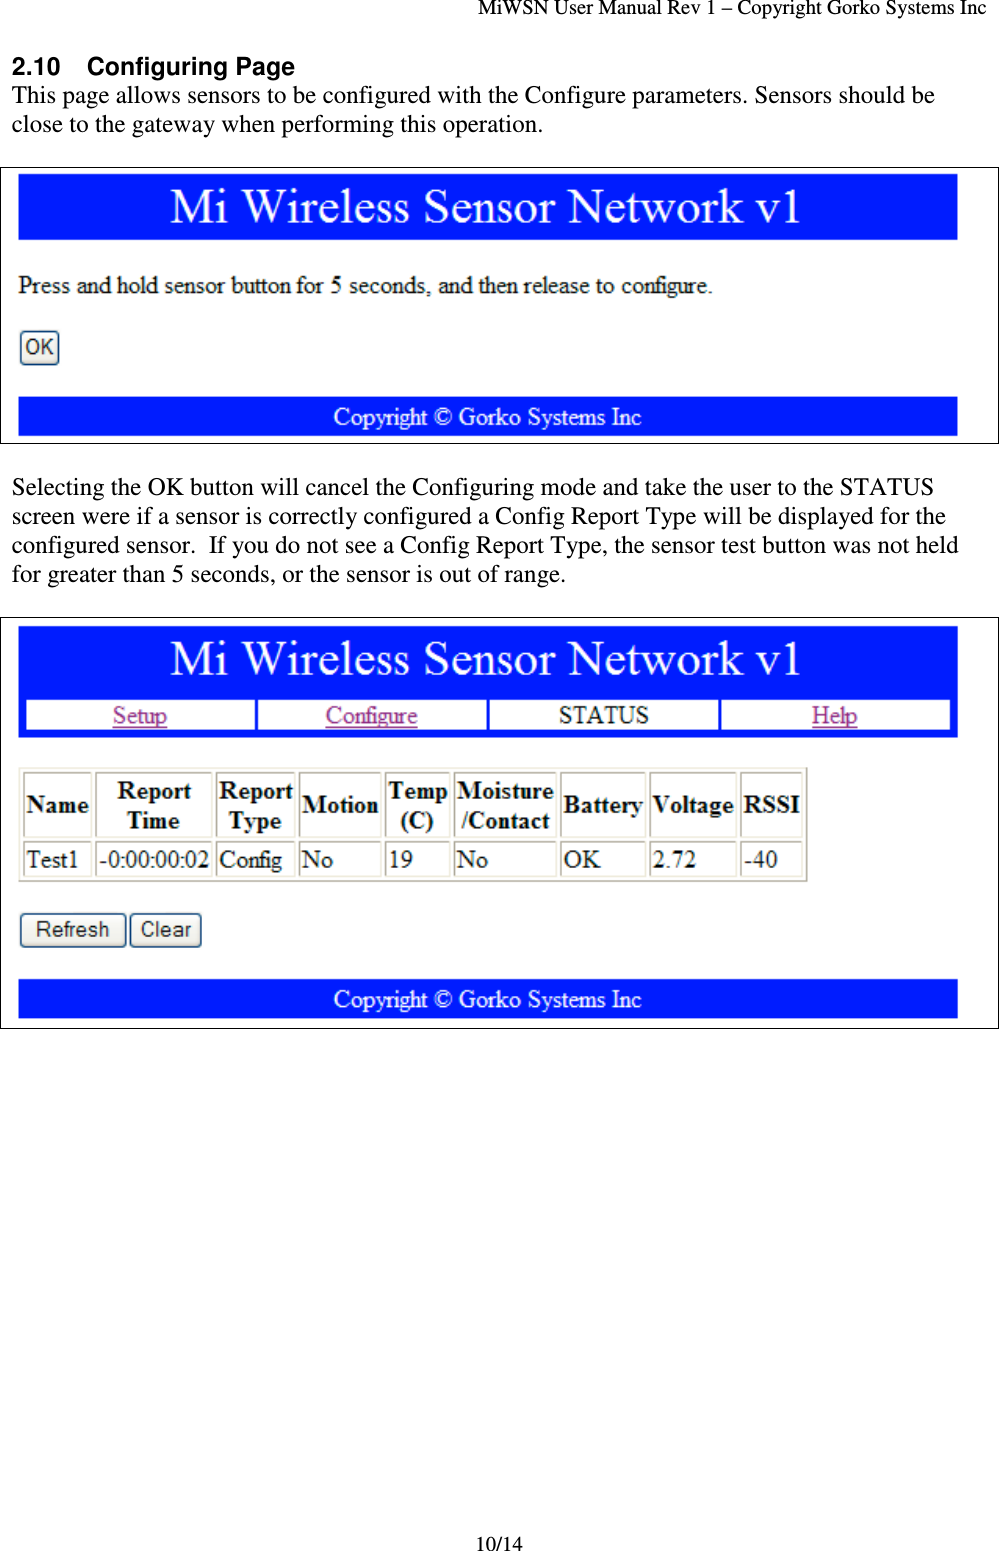 MiWSN User Manual Rev 1 – Copyright Gorko Systems Inc10/142.10 Configuring PageThis page allows sensors to be configured with the Configure parameters. Sensors should beclose to the gateway when performing this operation.Selecting the OK button will cancel the Configuring mode and take the user to the STATUSscreen were if a sensor is correctly configured a Config Report Type will be displayed for theconfigured sensor.  If you do not see a Config Report Type, the sensor test button was not heldfor greater than 5 seconds, or the sensor is out of range.